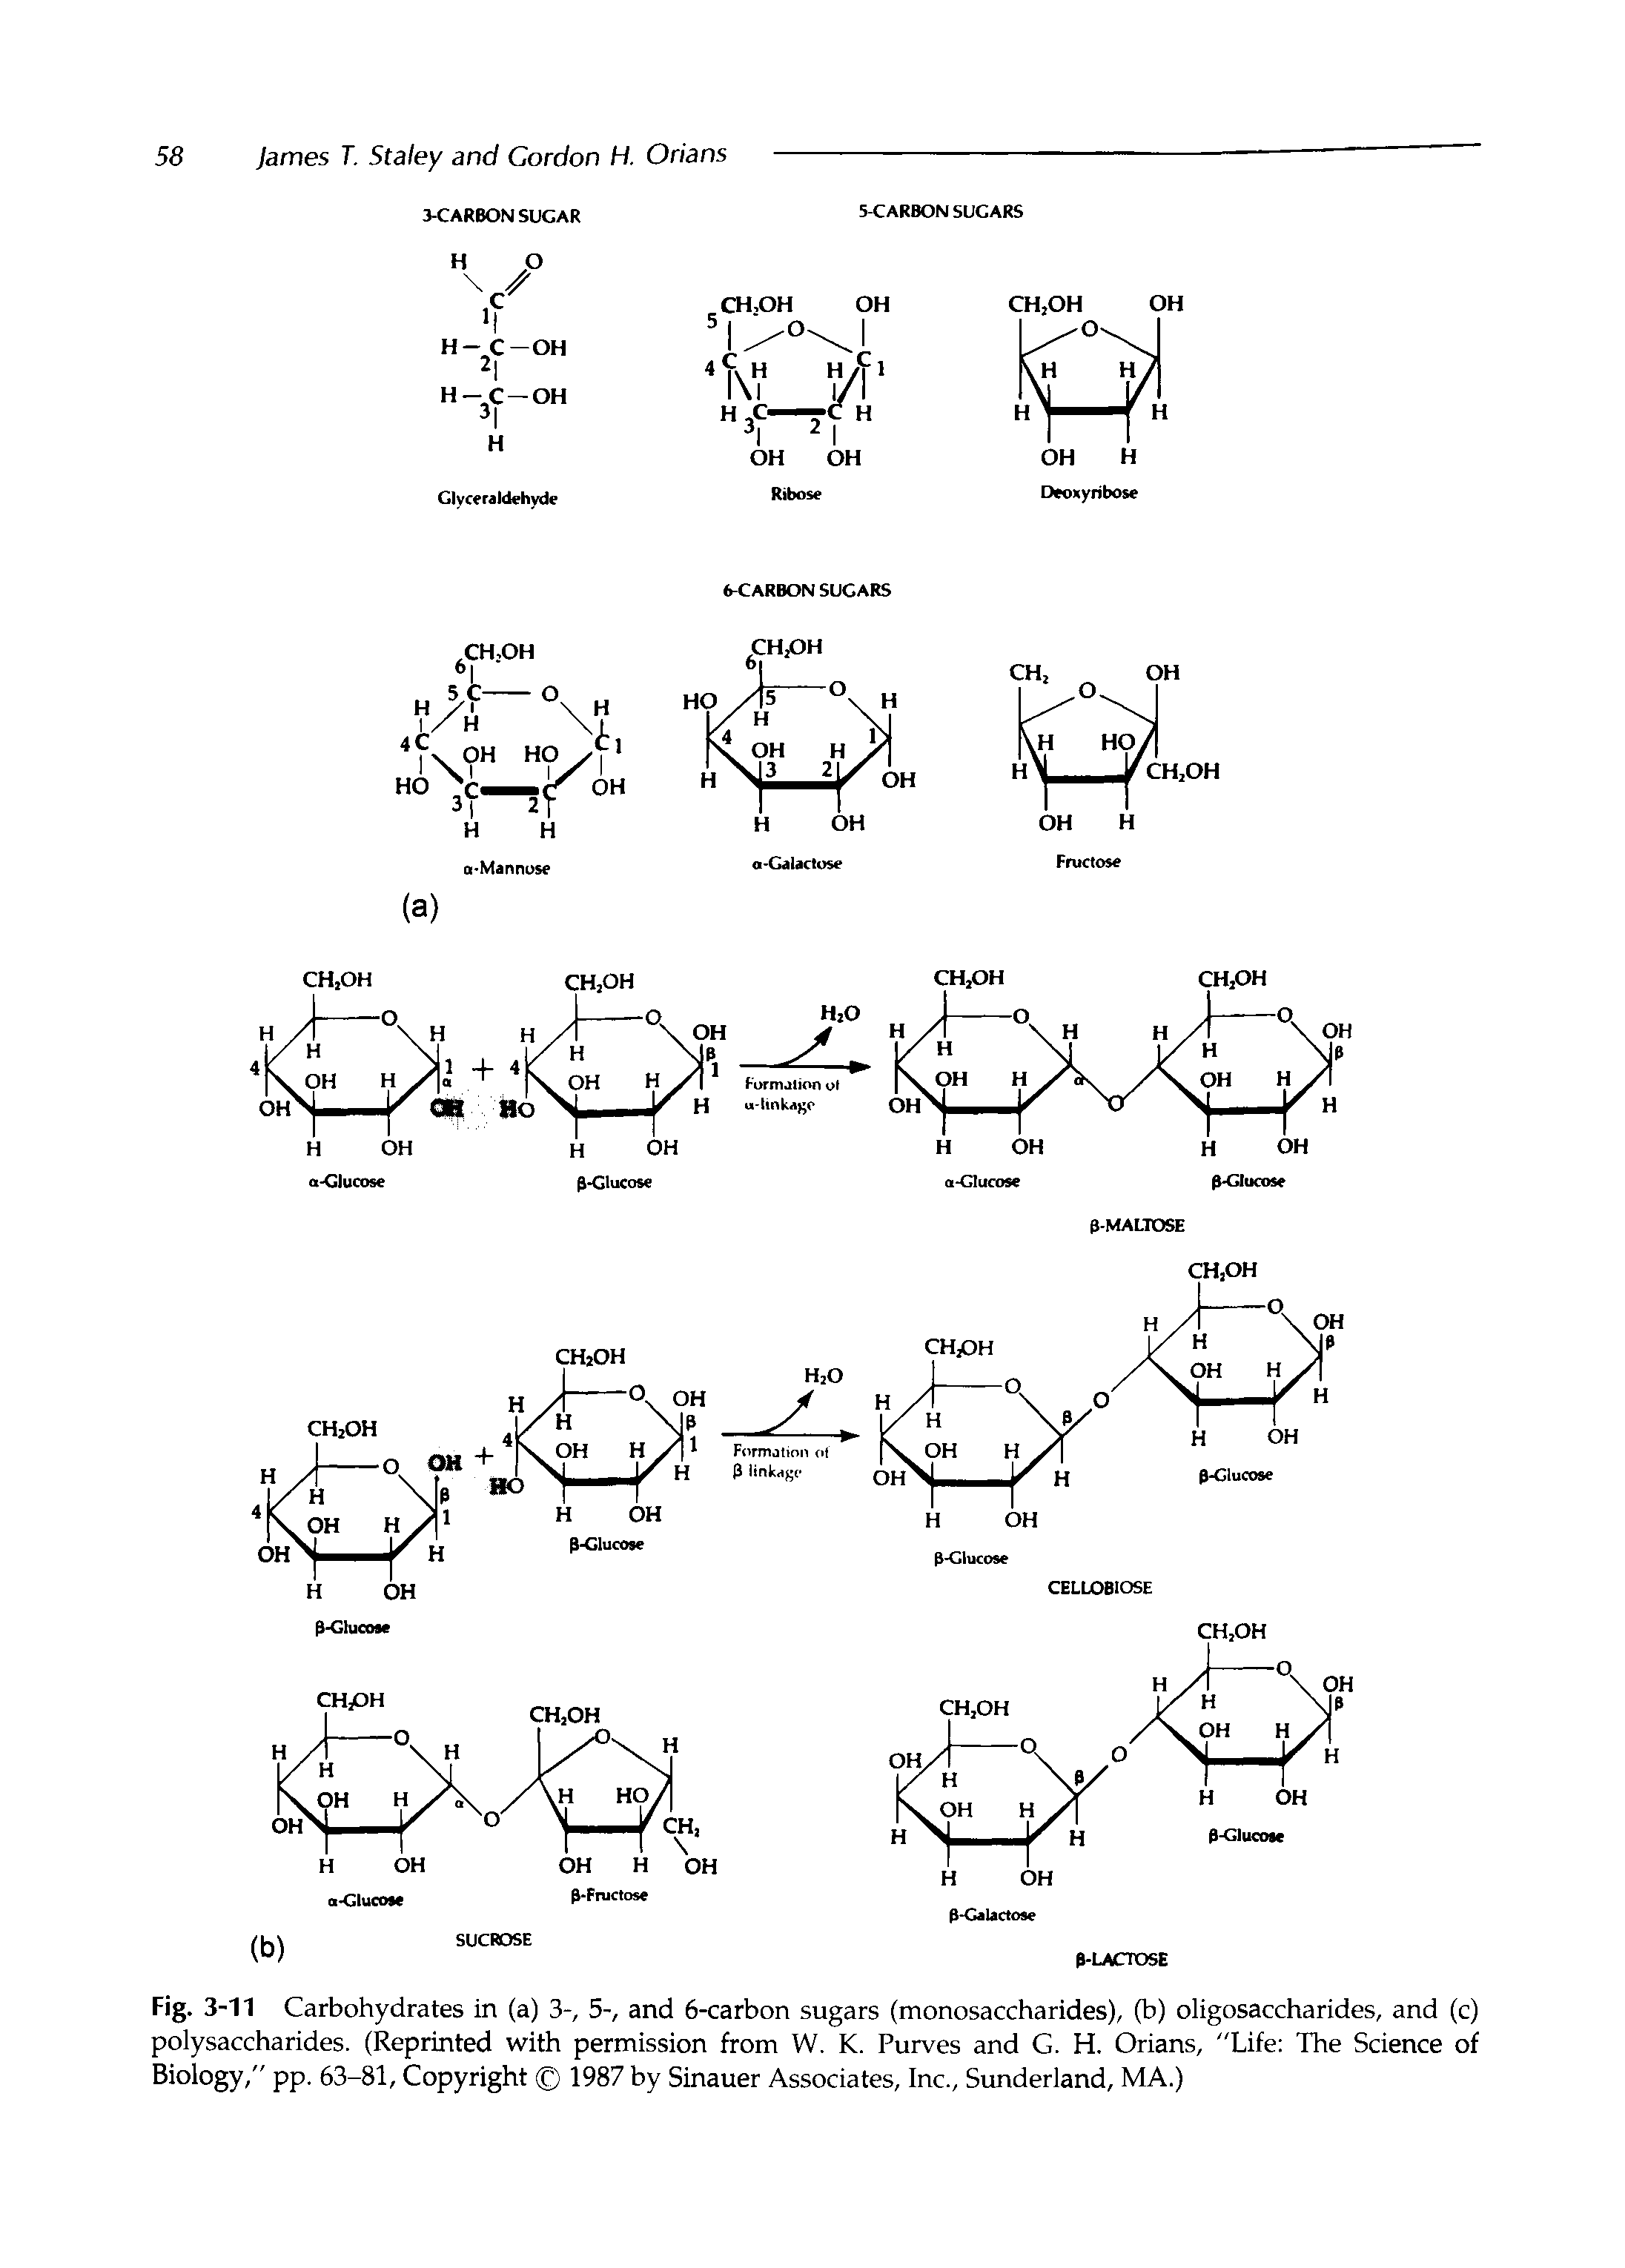 Fig. 3-11 Carbohydrates in (a) 3-, 5-, and 6-carbon sugars (monosaccharides), (b) oligosaccharides, and (c) polysaccharides. (Reprinted with permission from W. K. Purves and G. H. Orians, "Life The Science of Biology," pp. 63-81, Copyright 1987 by Sinauer Associates, Inc., Simderland, MA.)...